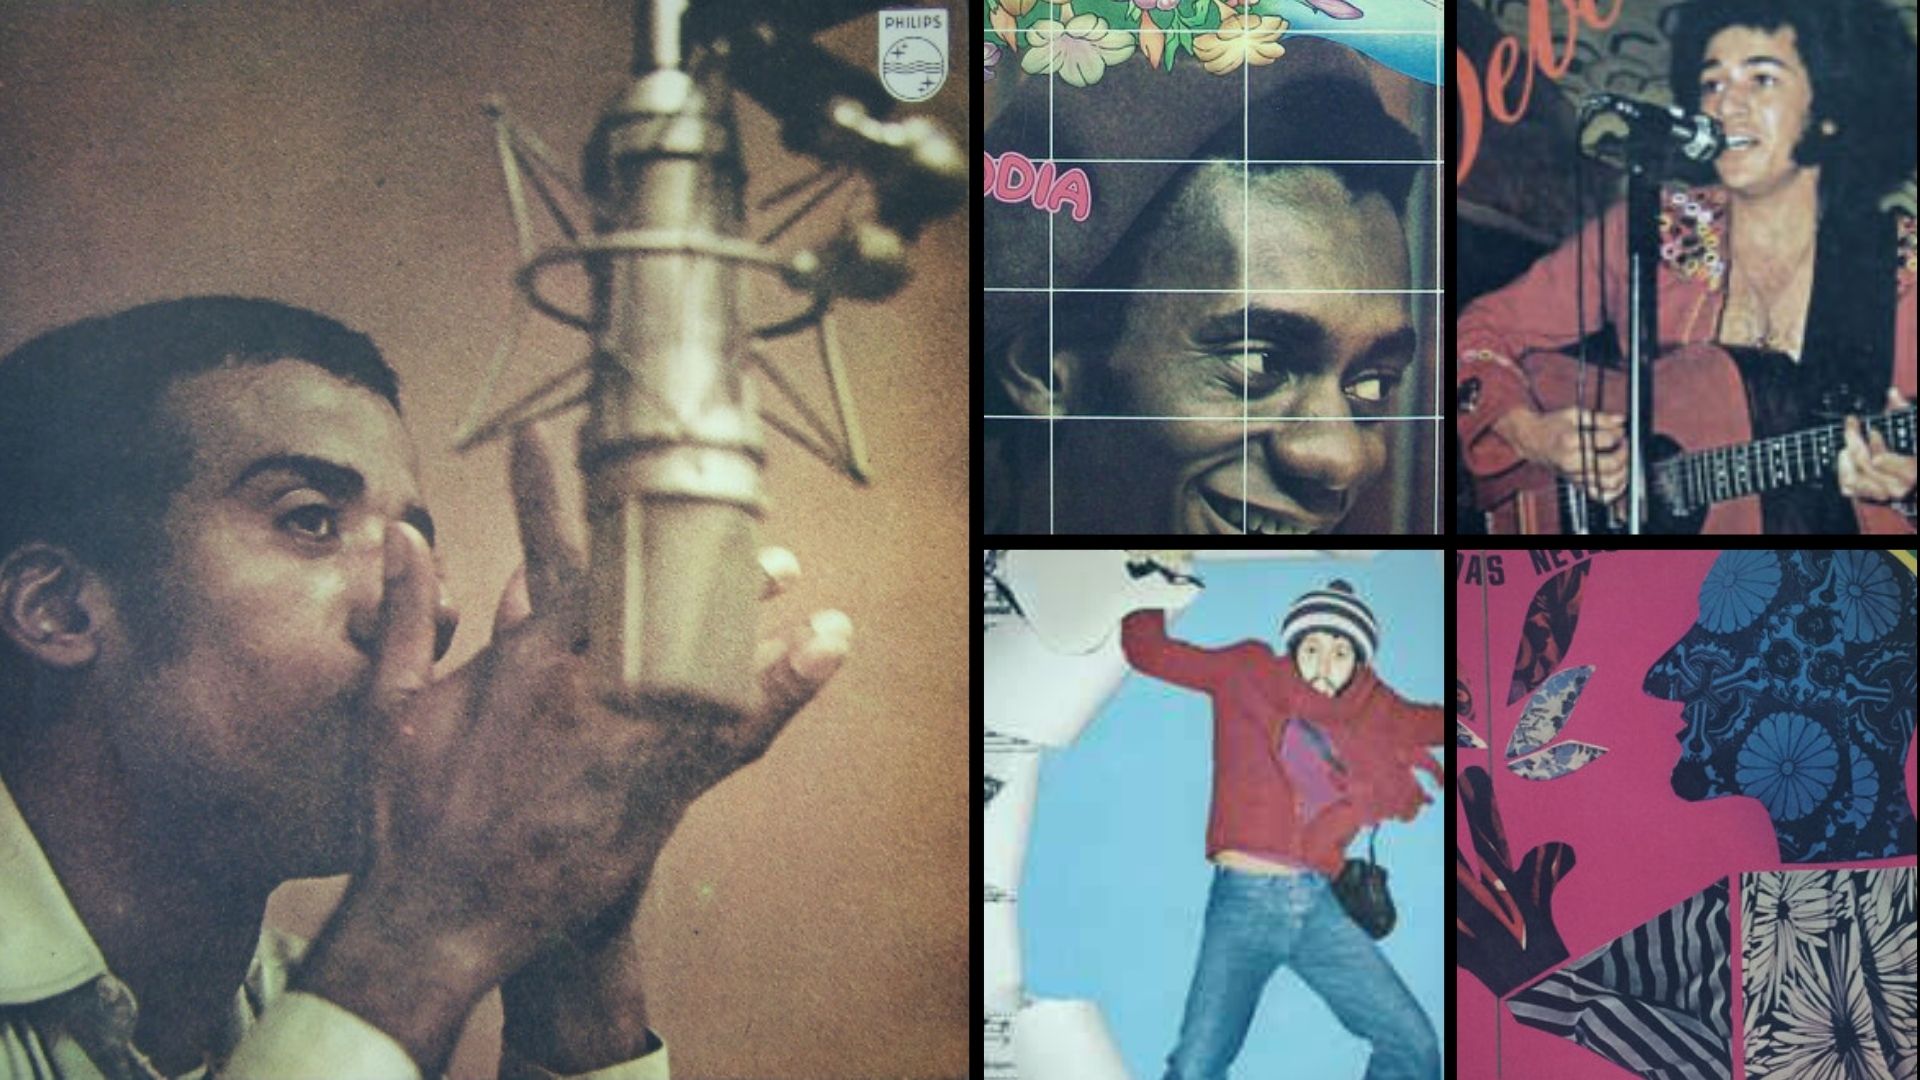 If You Like Fôrça Bruta by Jorge Ben, Listen to These 4 Albums